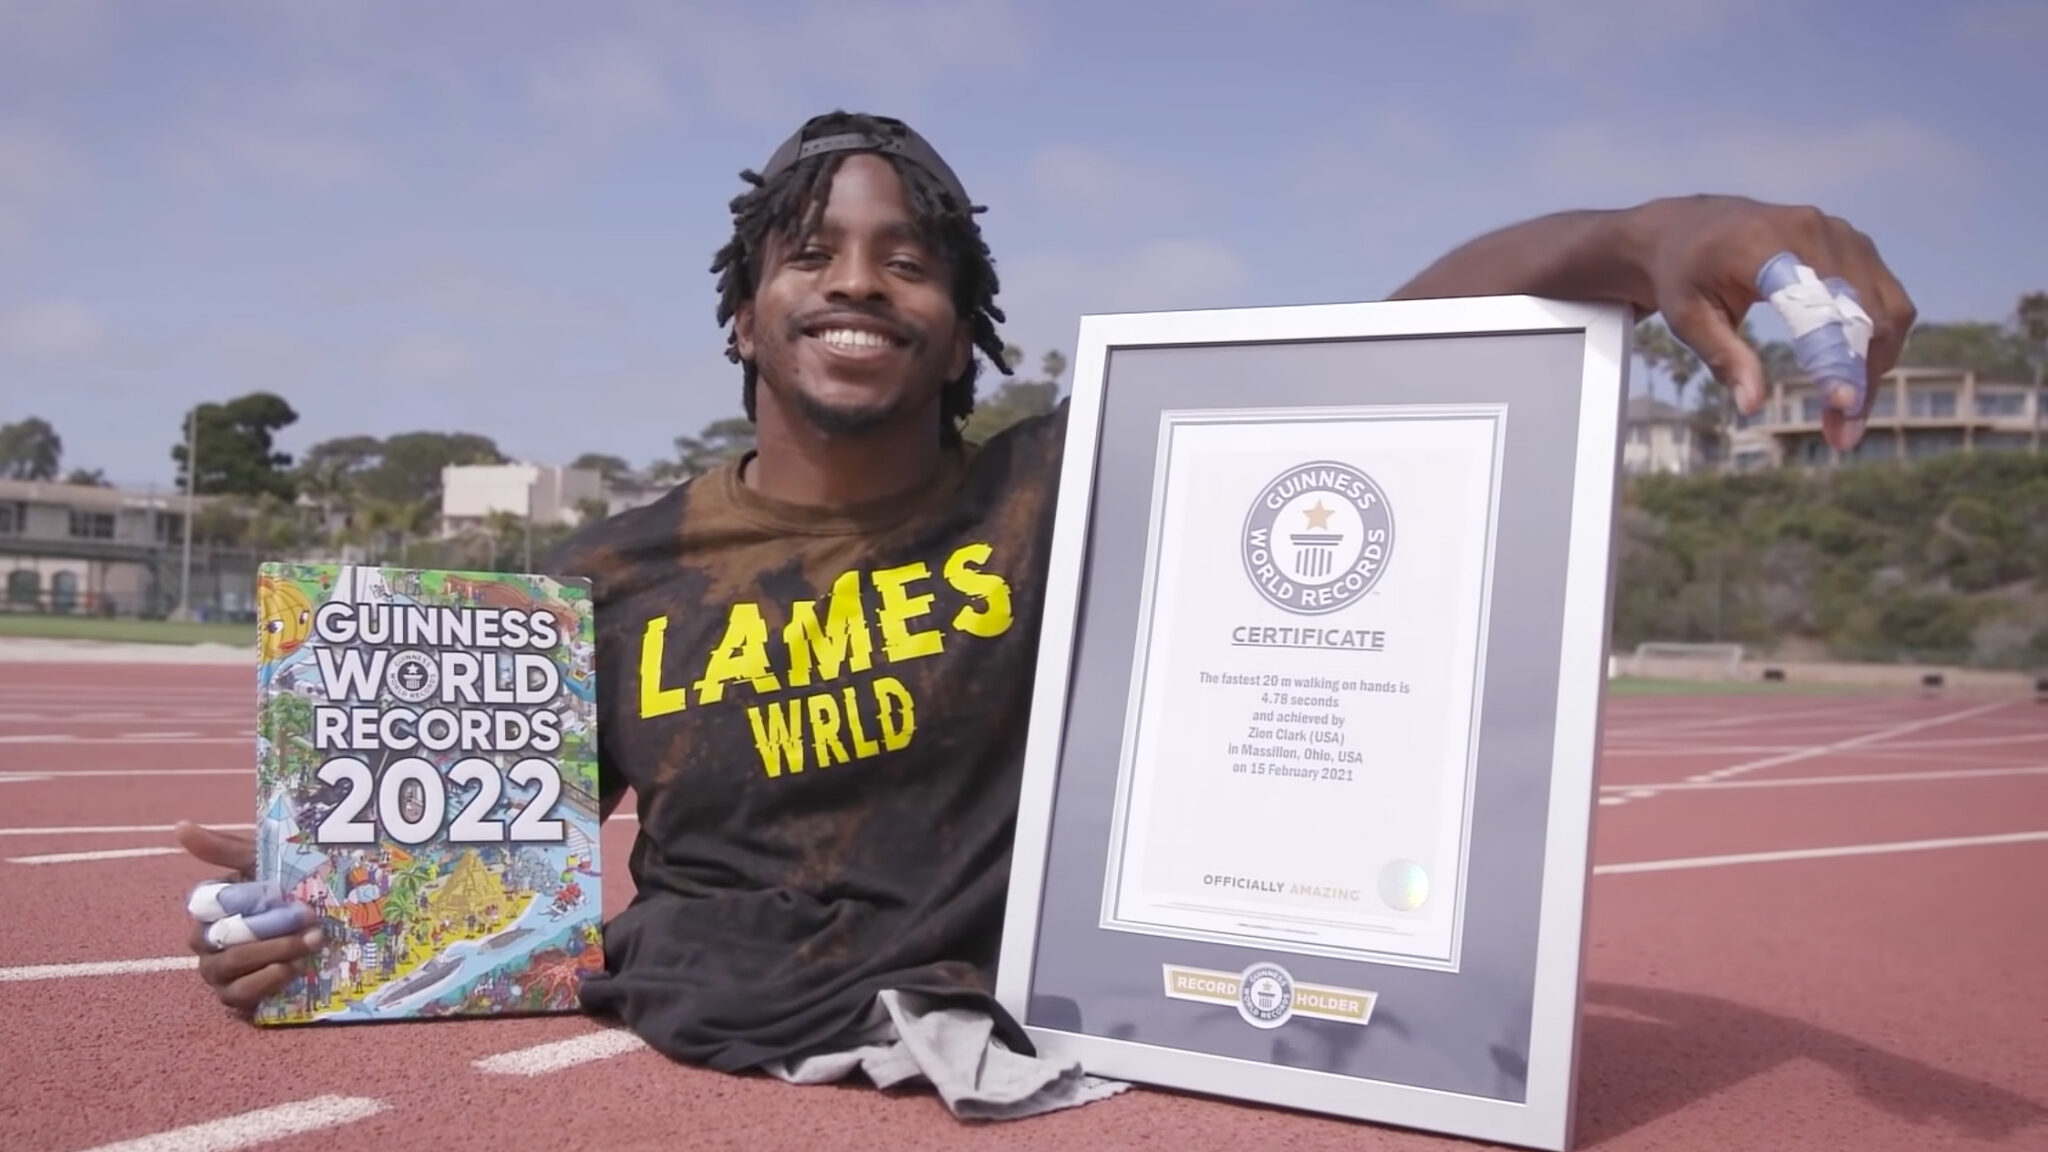 who invented the guinness book of world records and how did it originate